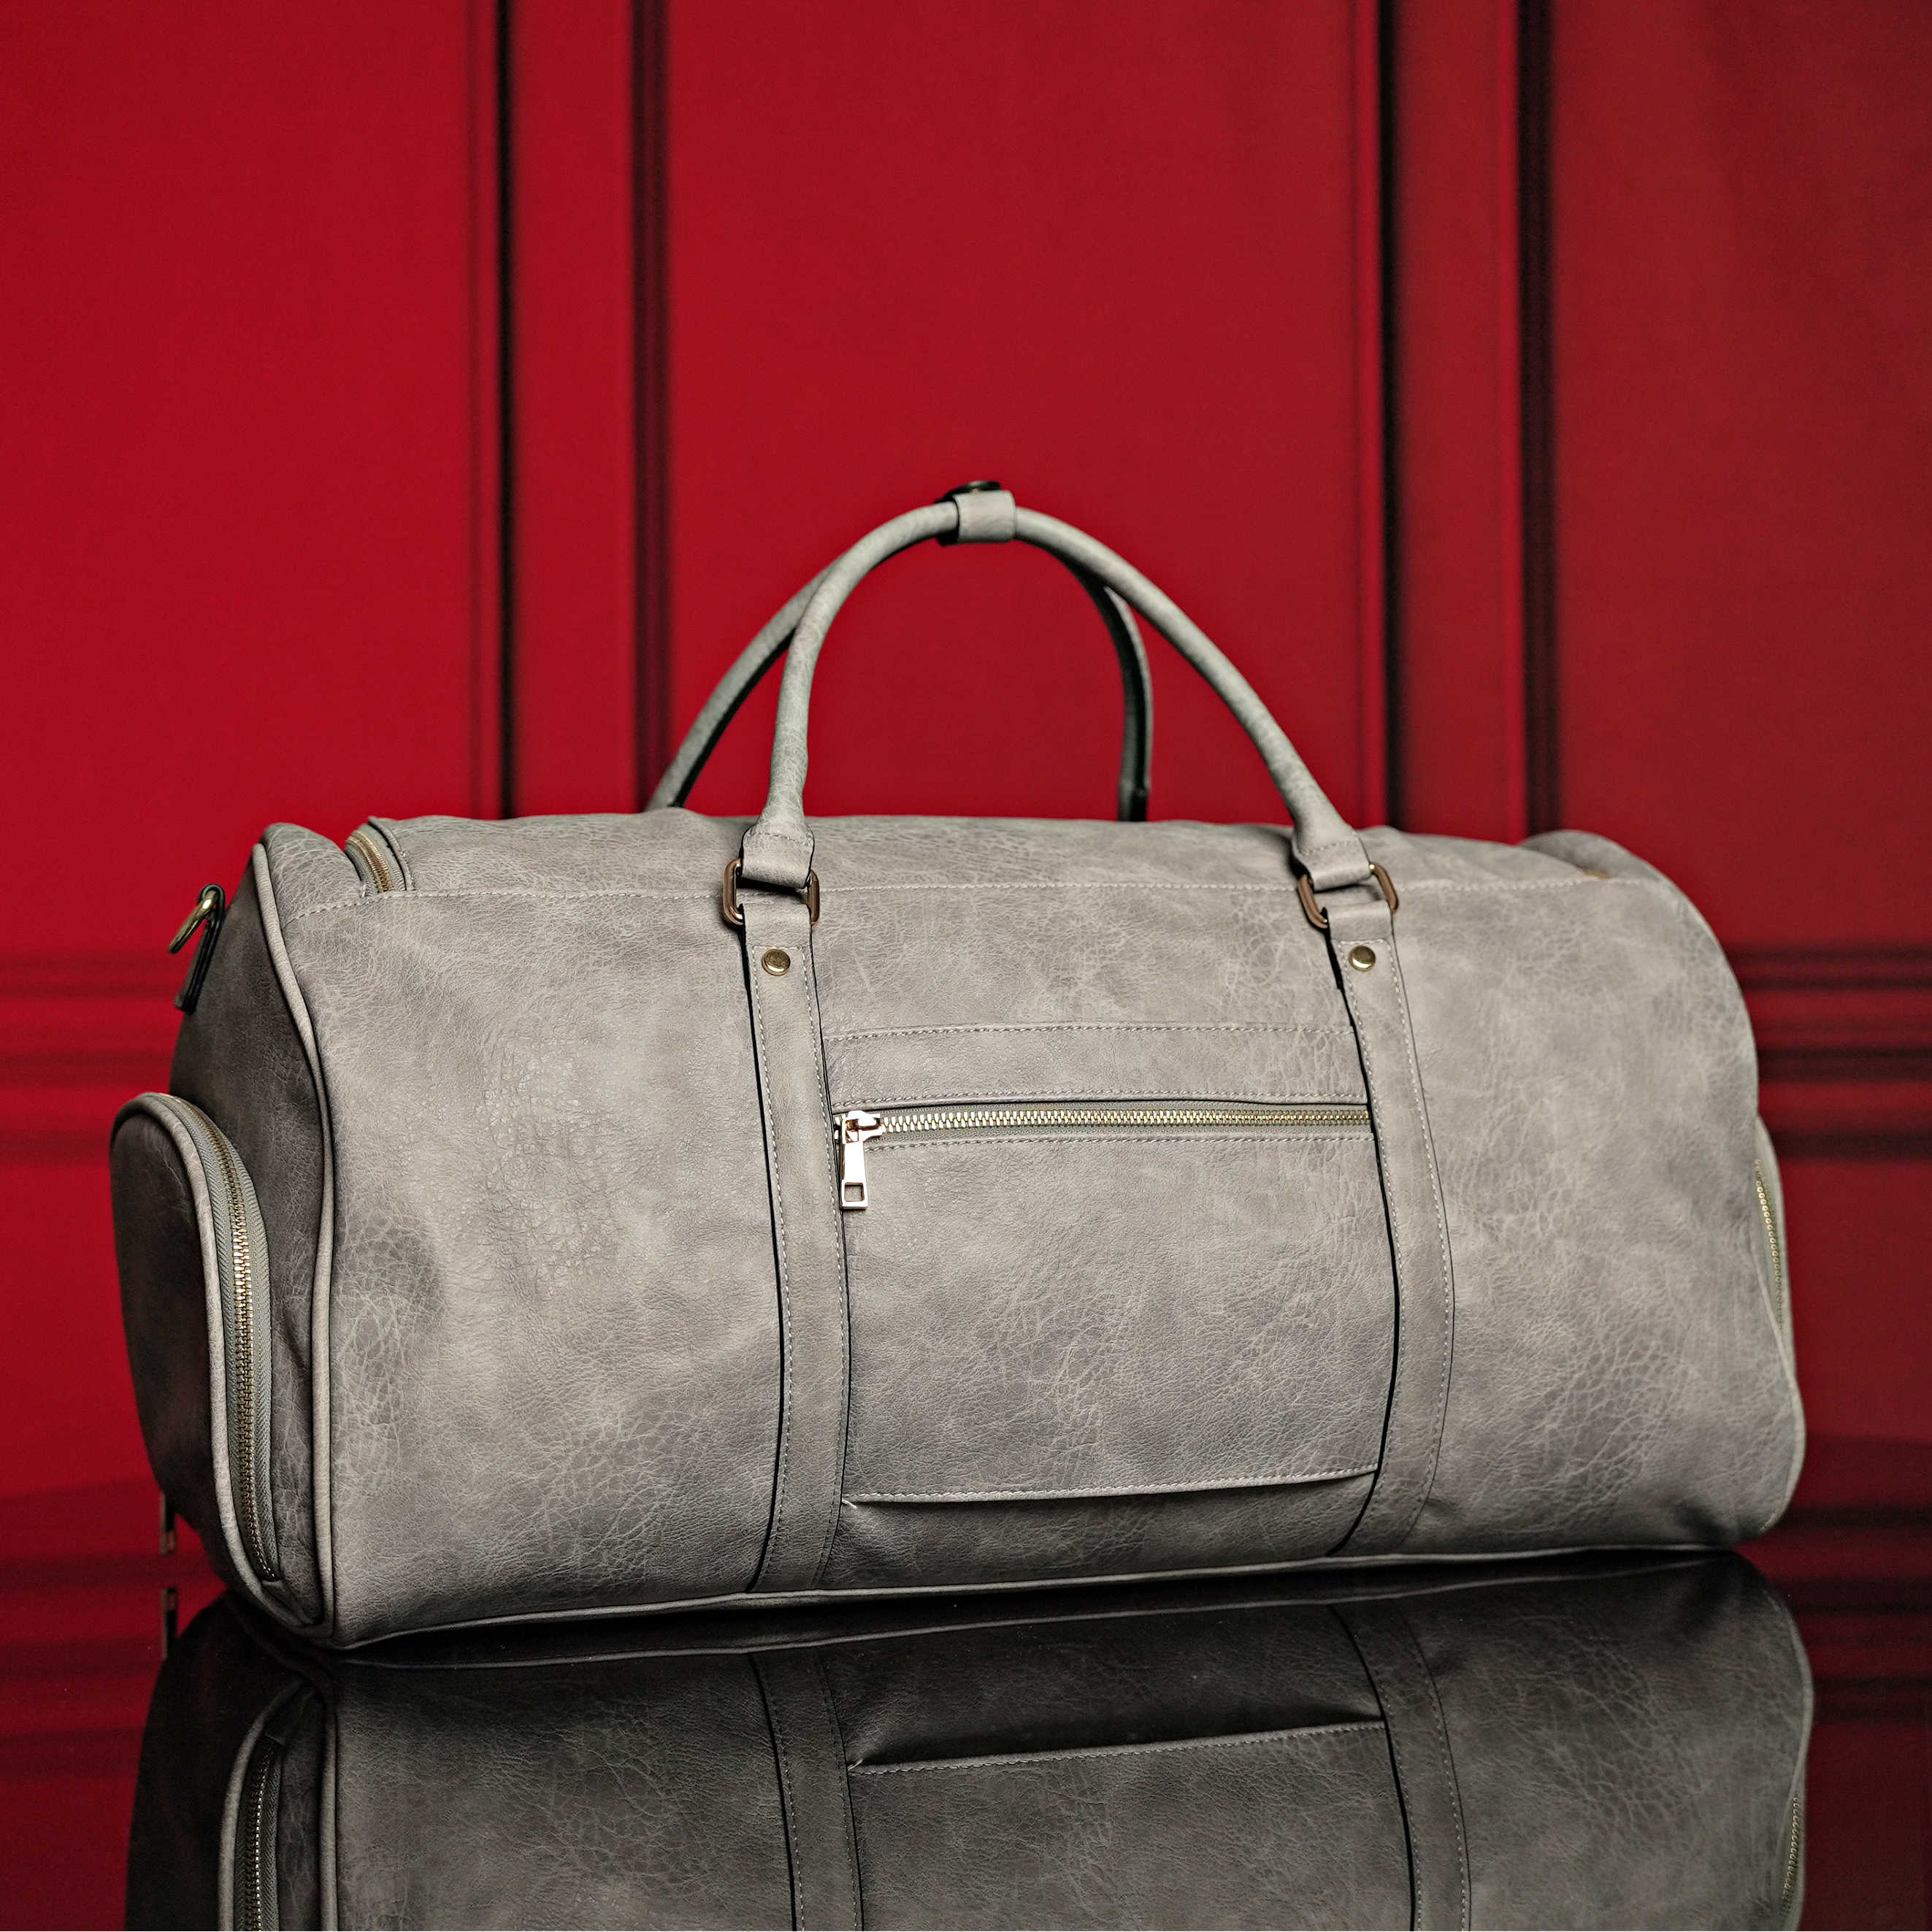 Grey Tumbled Luciano Leather Duffle Bag (New Weekender Design) - Sole Premise